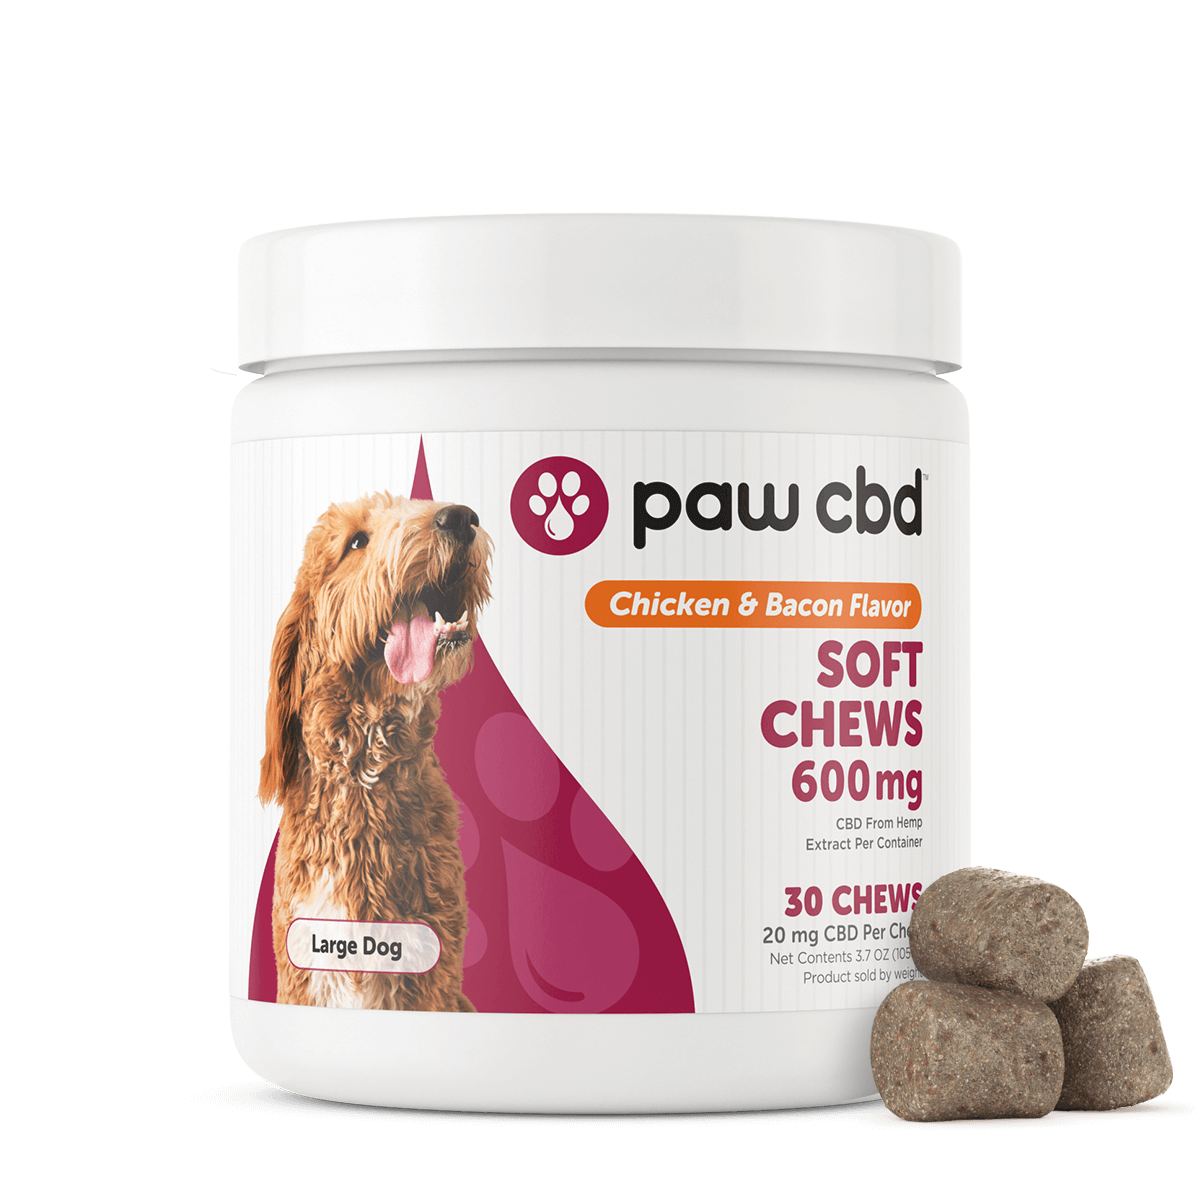 CbdMD Pet CBD Soft Chews for Dogs Chicken and Bacon 600mg, 30 Count